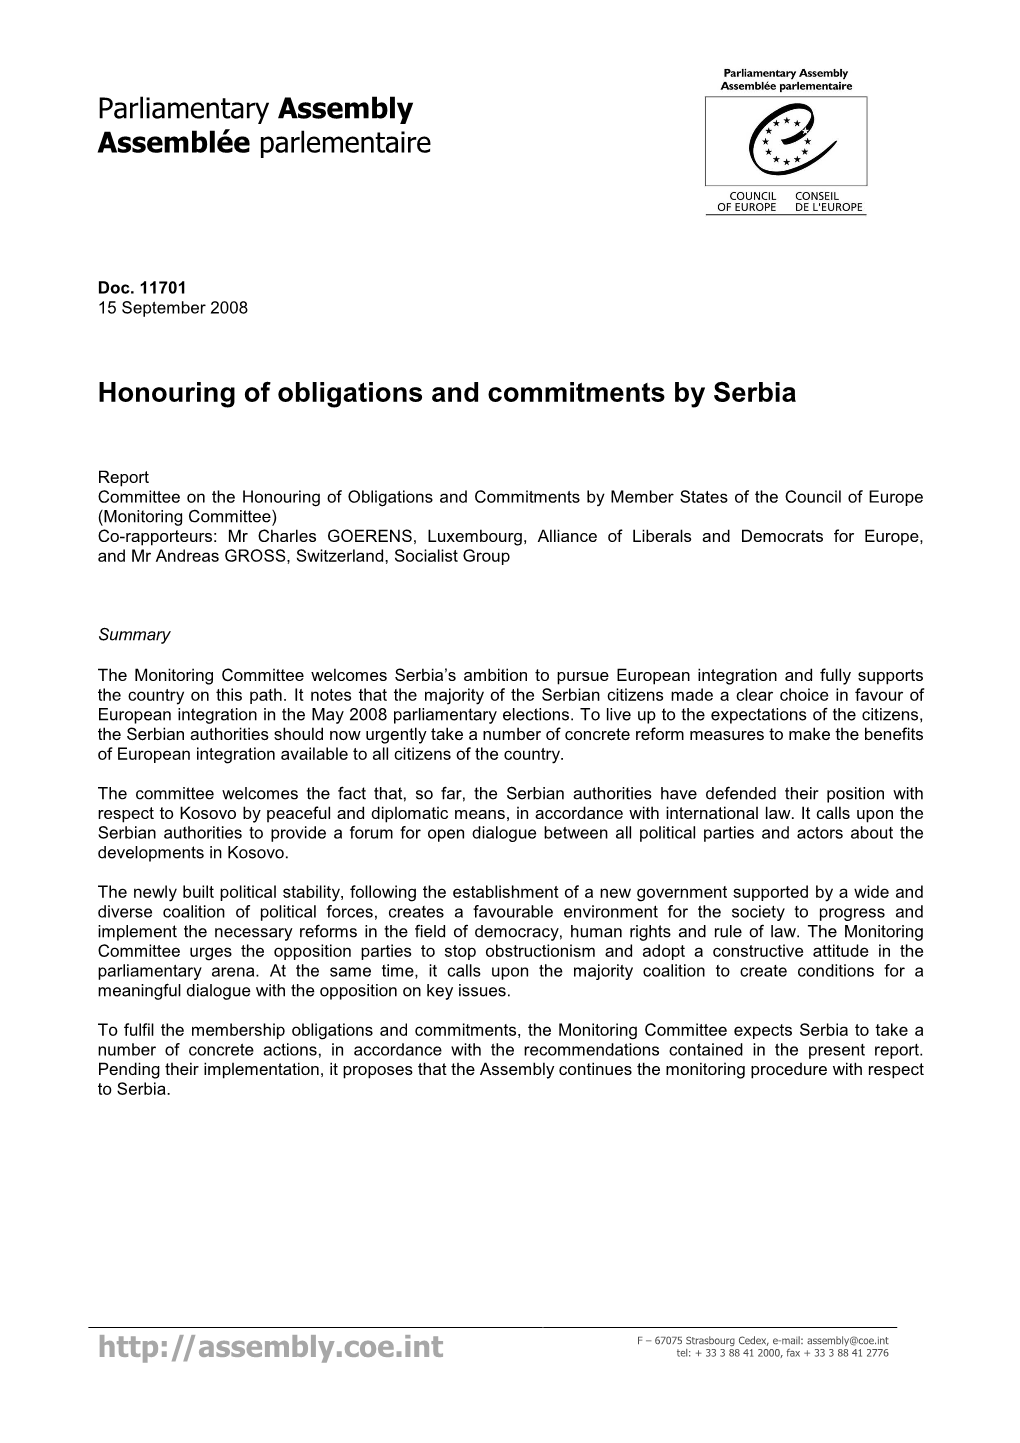 Honouring of Obligations and Commitments by Serbia